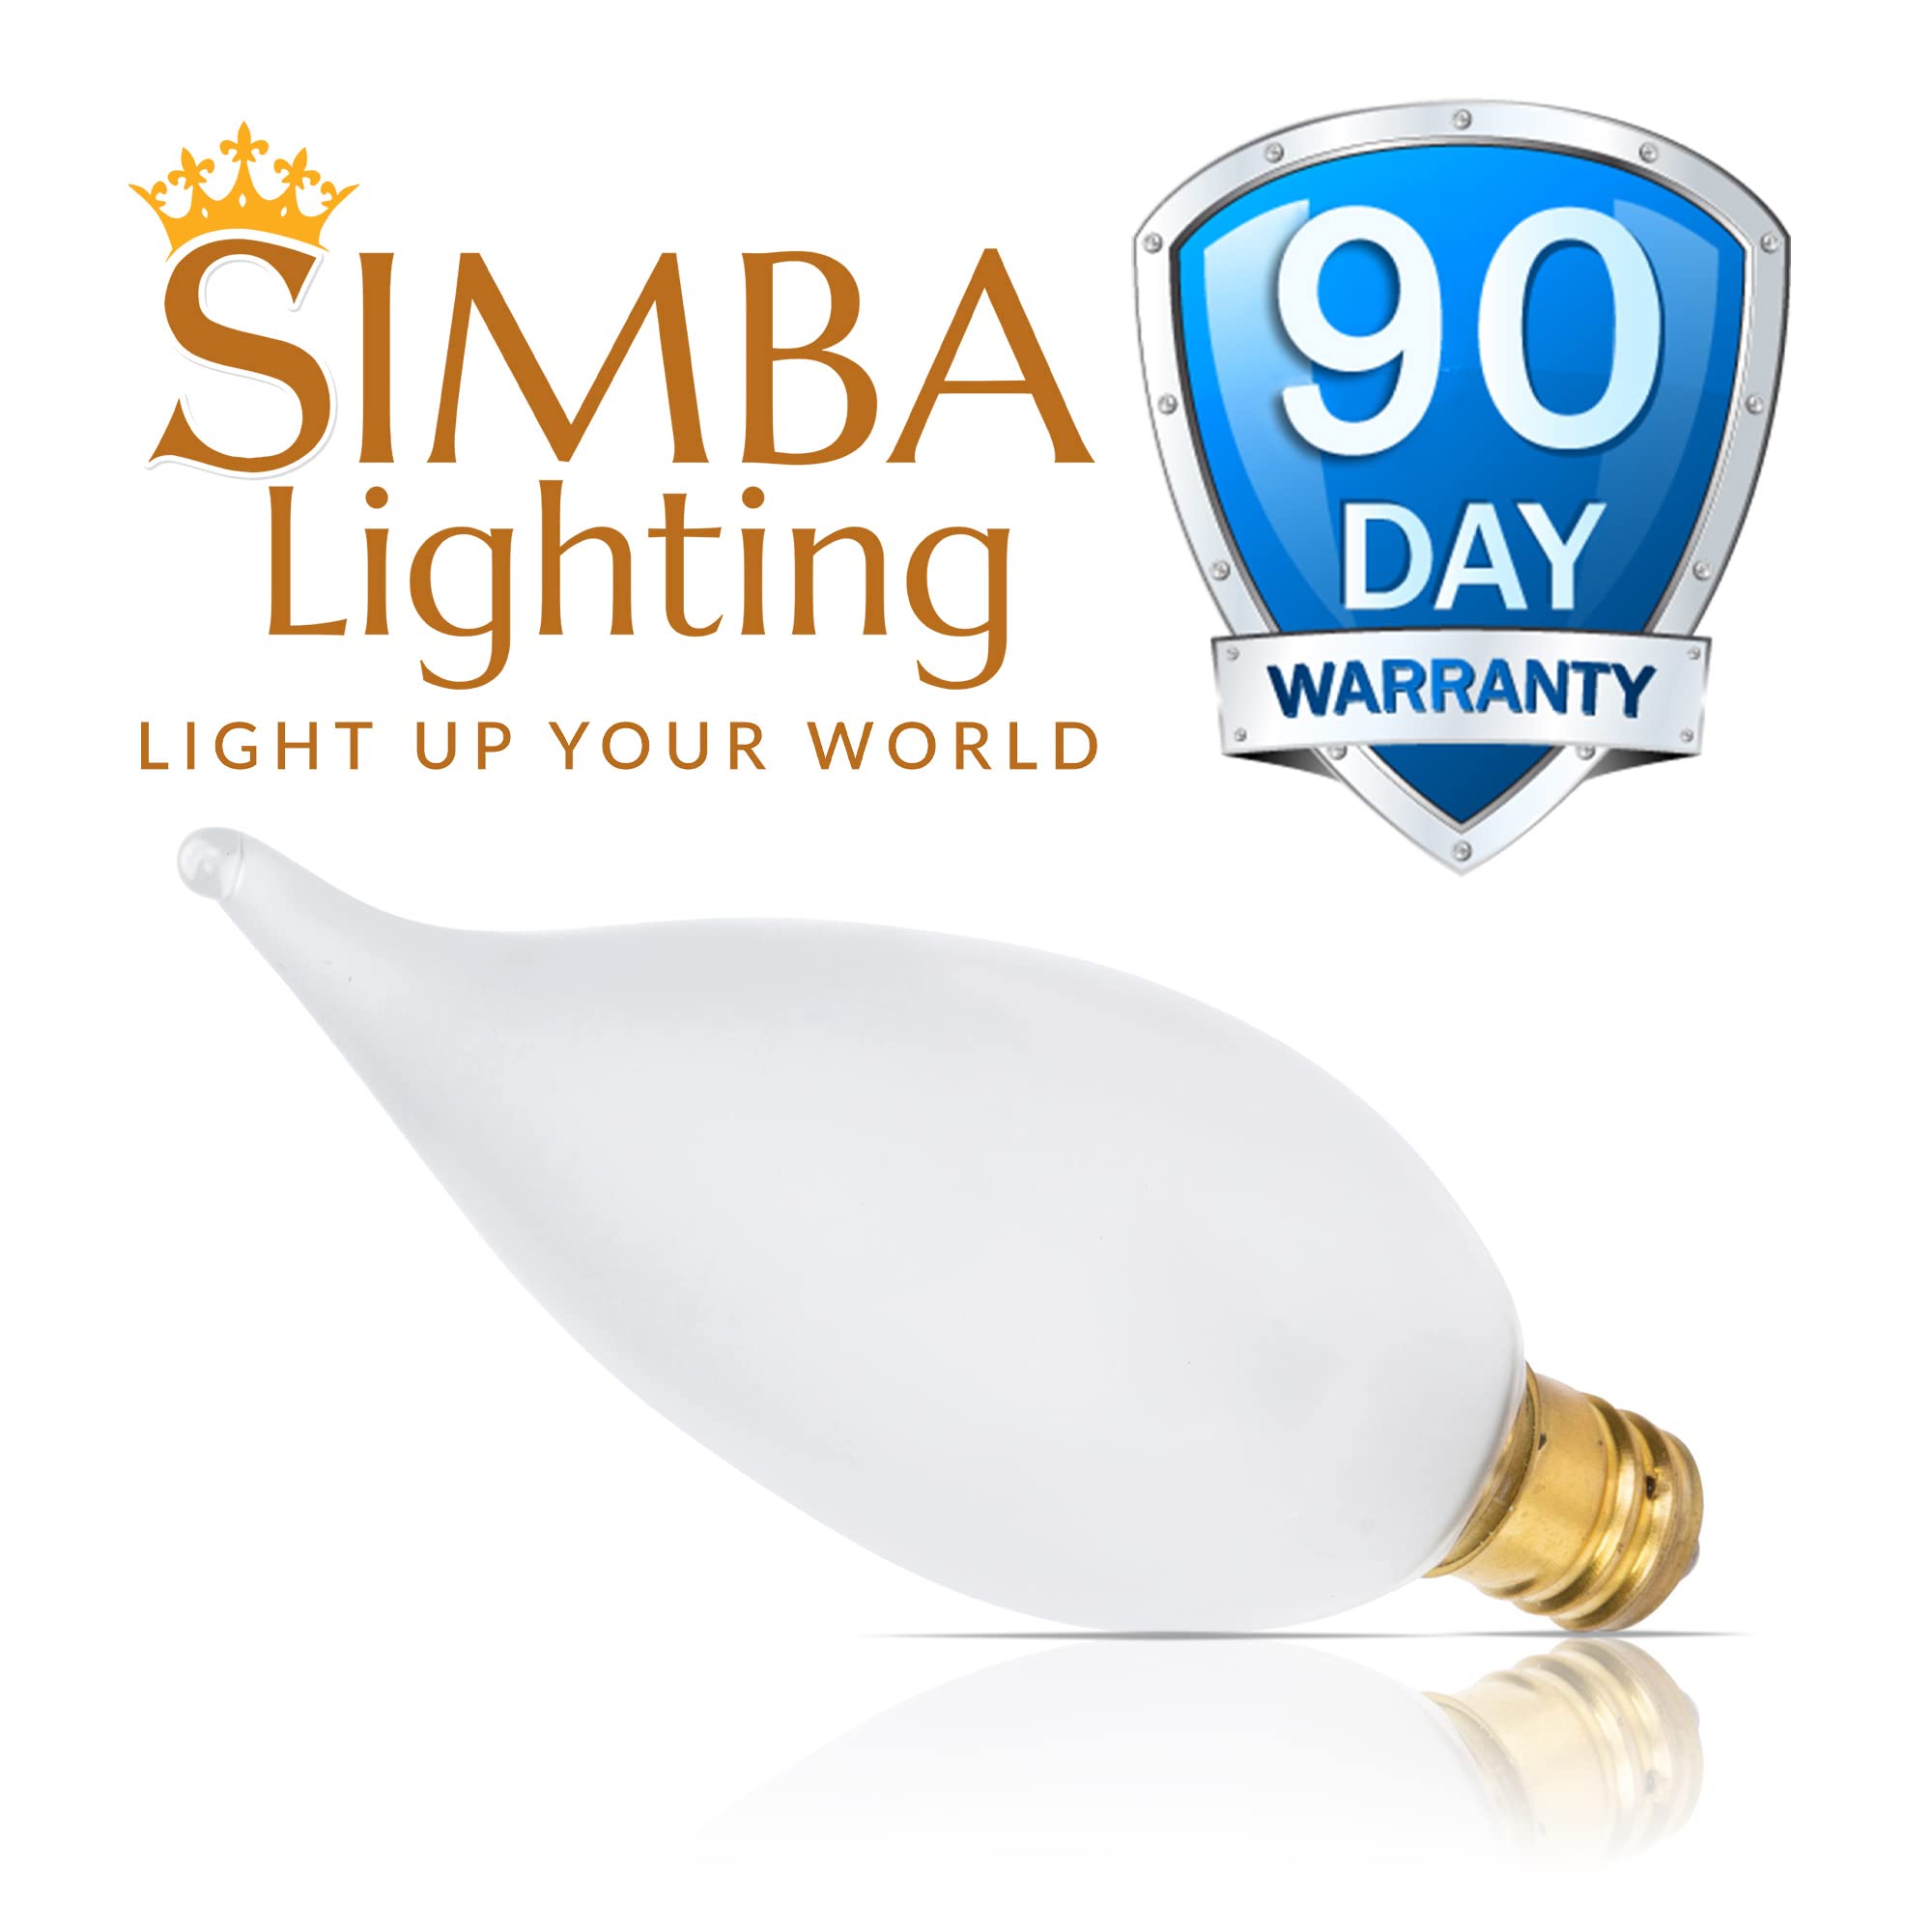 Simba Lighting Candelabra Flame Tip Frosted CA10 25W E12 Base (12 Pack) Decorative Incandescent Light Bulbs 120V for Chandeliers, Ceiling Fan Lights, Pendants, Wall Sconces, Dimmable, Warm White 2700K